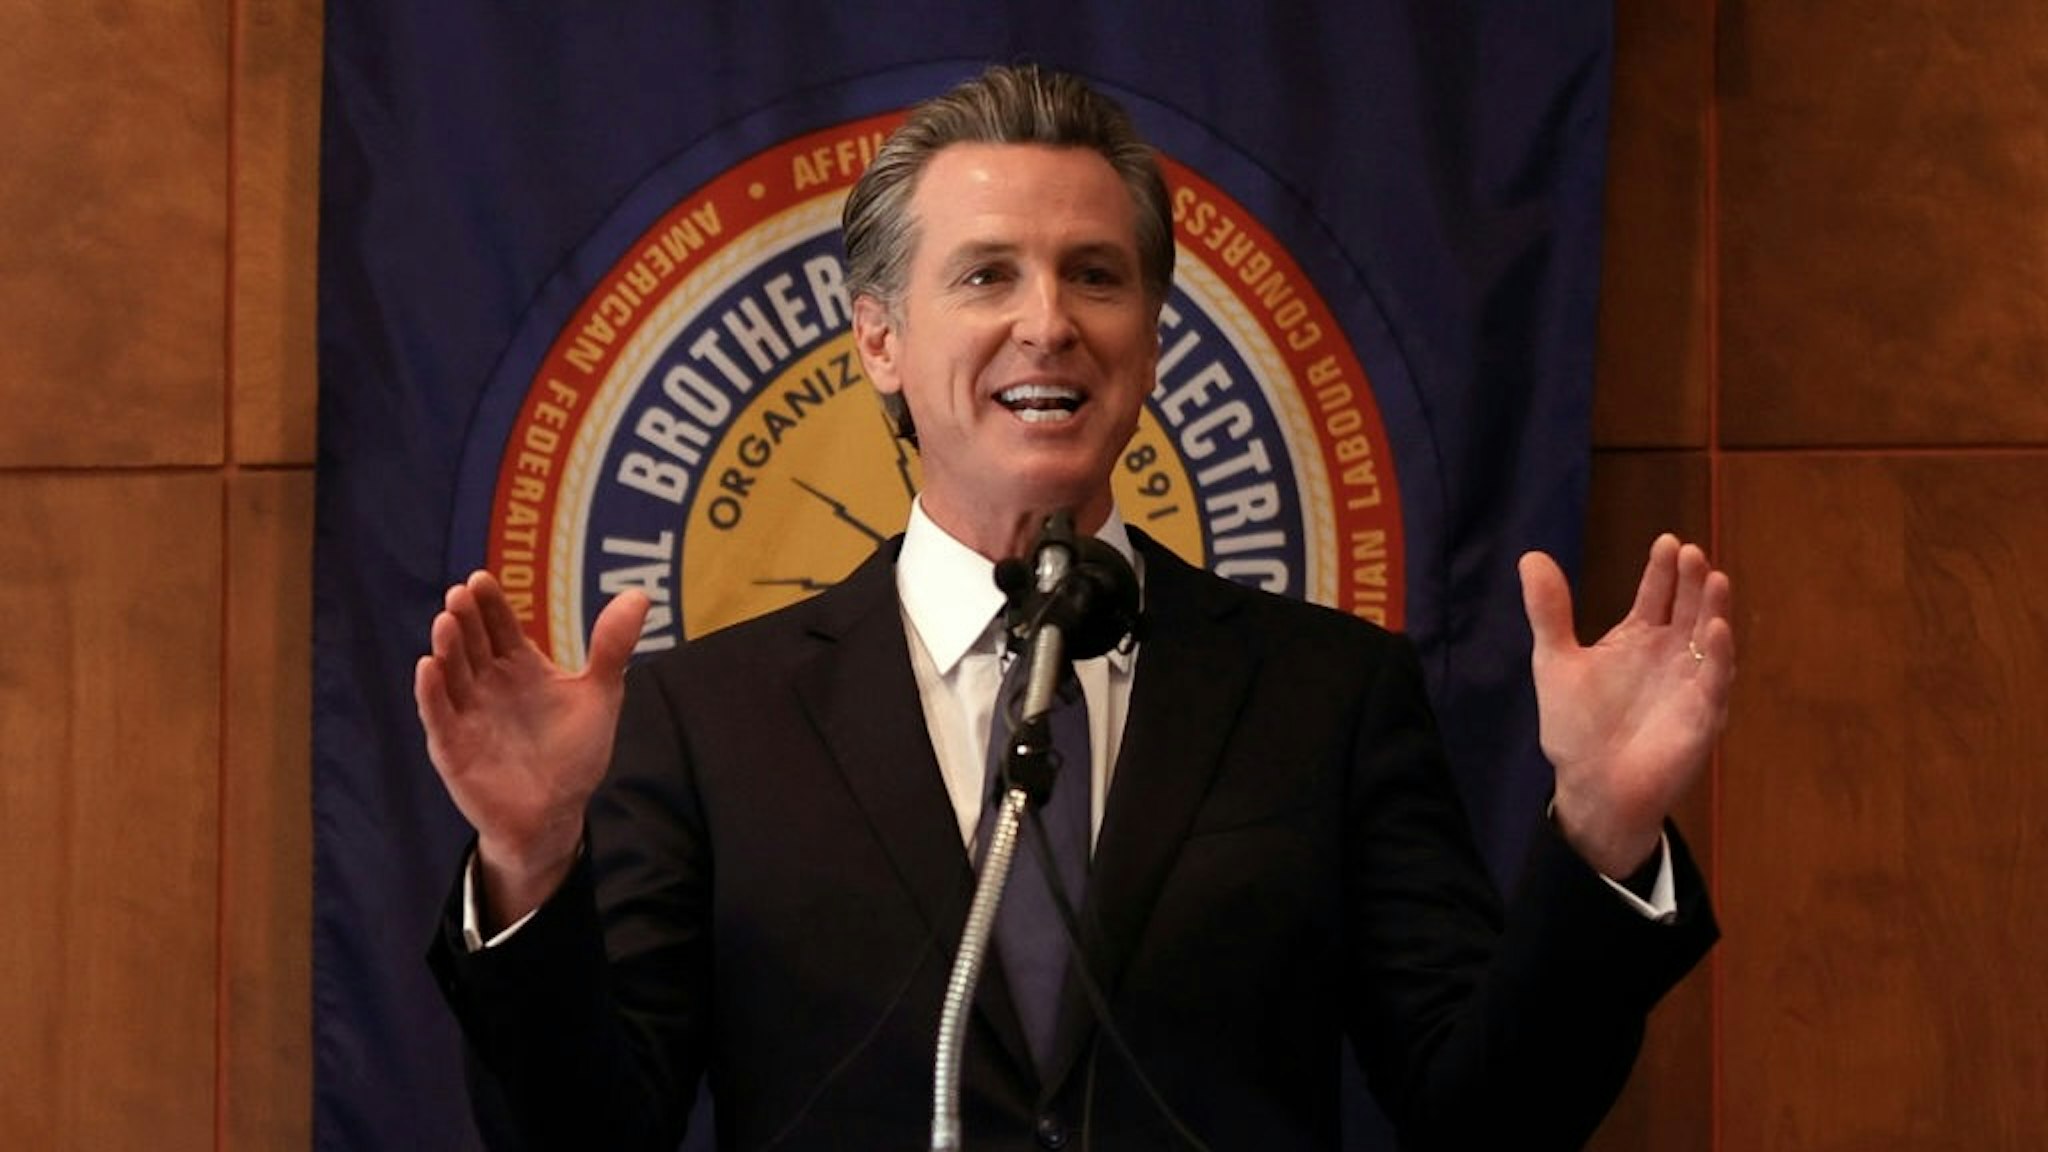 California Governor Gavin Newsom Meets With Campaign Staff And Volunteer On Day Of Recall Election Vote SAN FRANCISCO, CALIFORNIA - SEPTEMBER 14: California Gov. Gavin Newsom speaks to union workers and volunteers on election day at the IBEW Local 6 union hall on September 14, 2021 in San Francisco, California. Californians are heading to the polls to cast their ballots in the California recall election of Gov. Gavin Newsom. (Photo by Justin Sullivan/Getty Images) Justin Sullivan / Staff